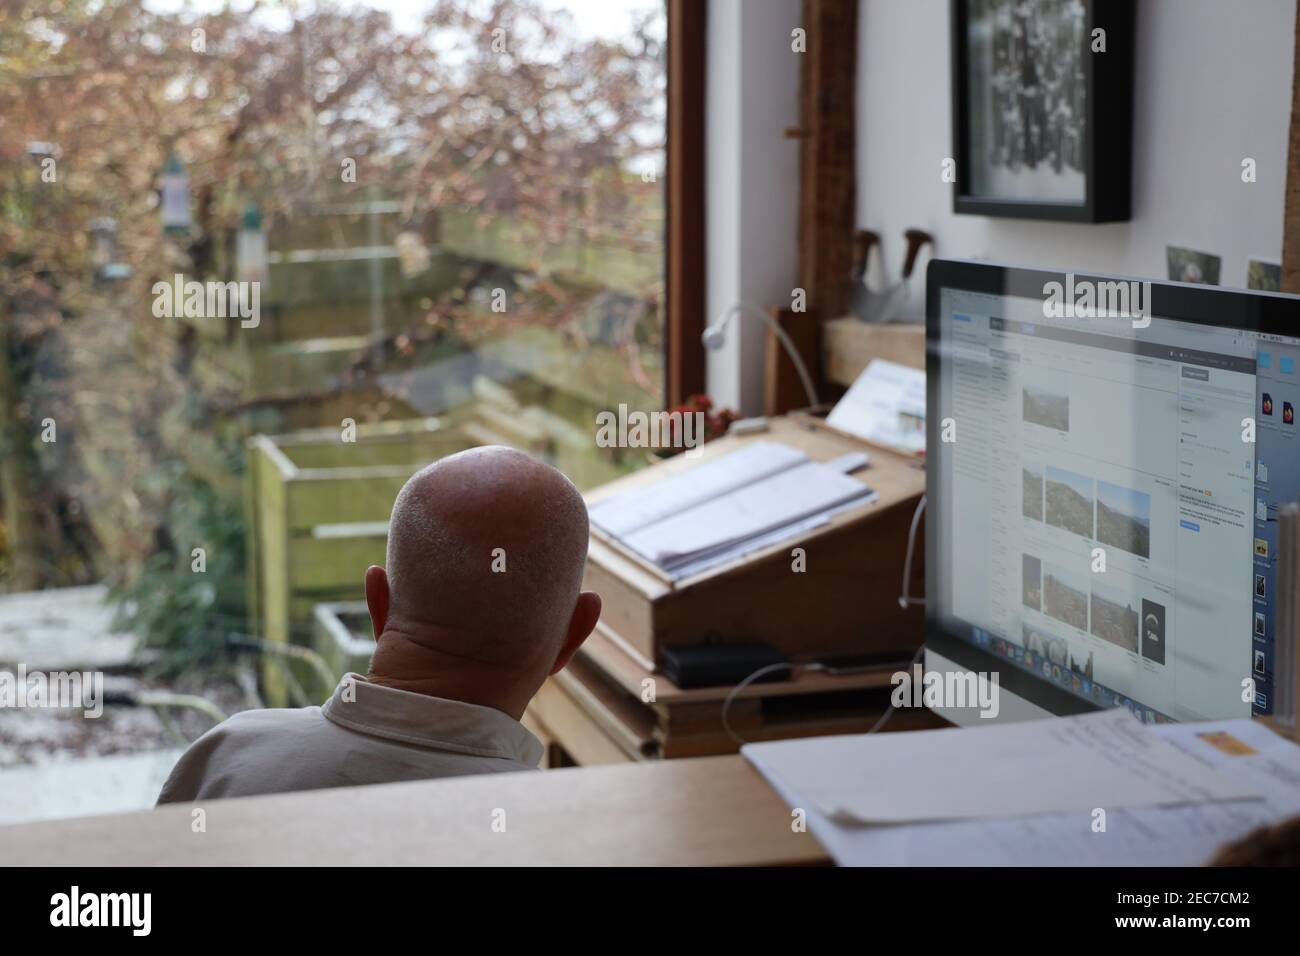 Man working during Covid 19 virus lockdown. Distracted from work on the computer by birds outside. Housebound incarcerated activity. Trapped inside. Stock Photo